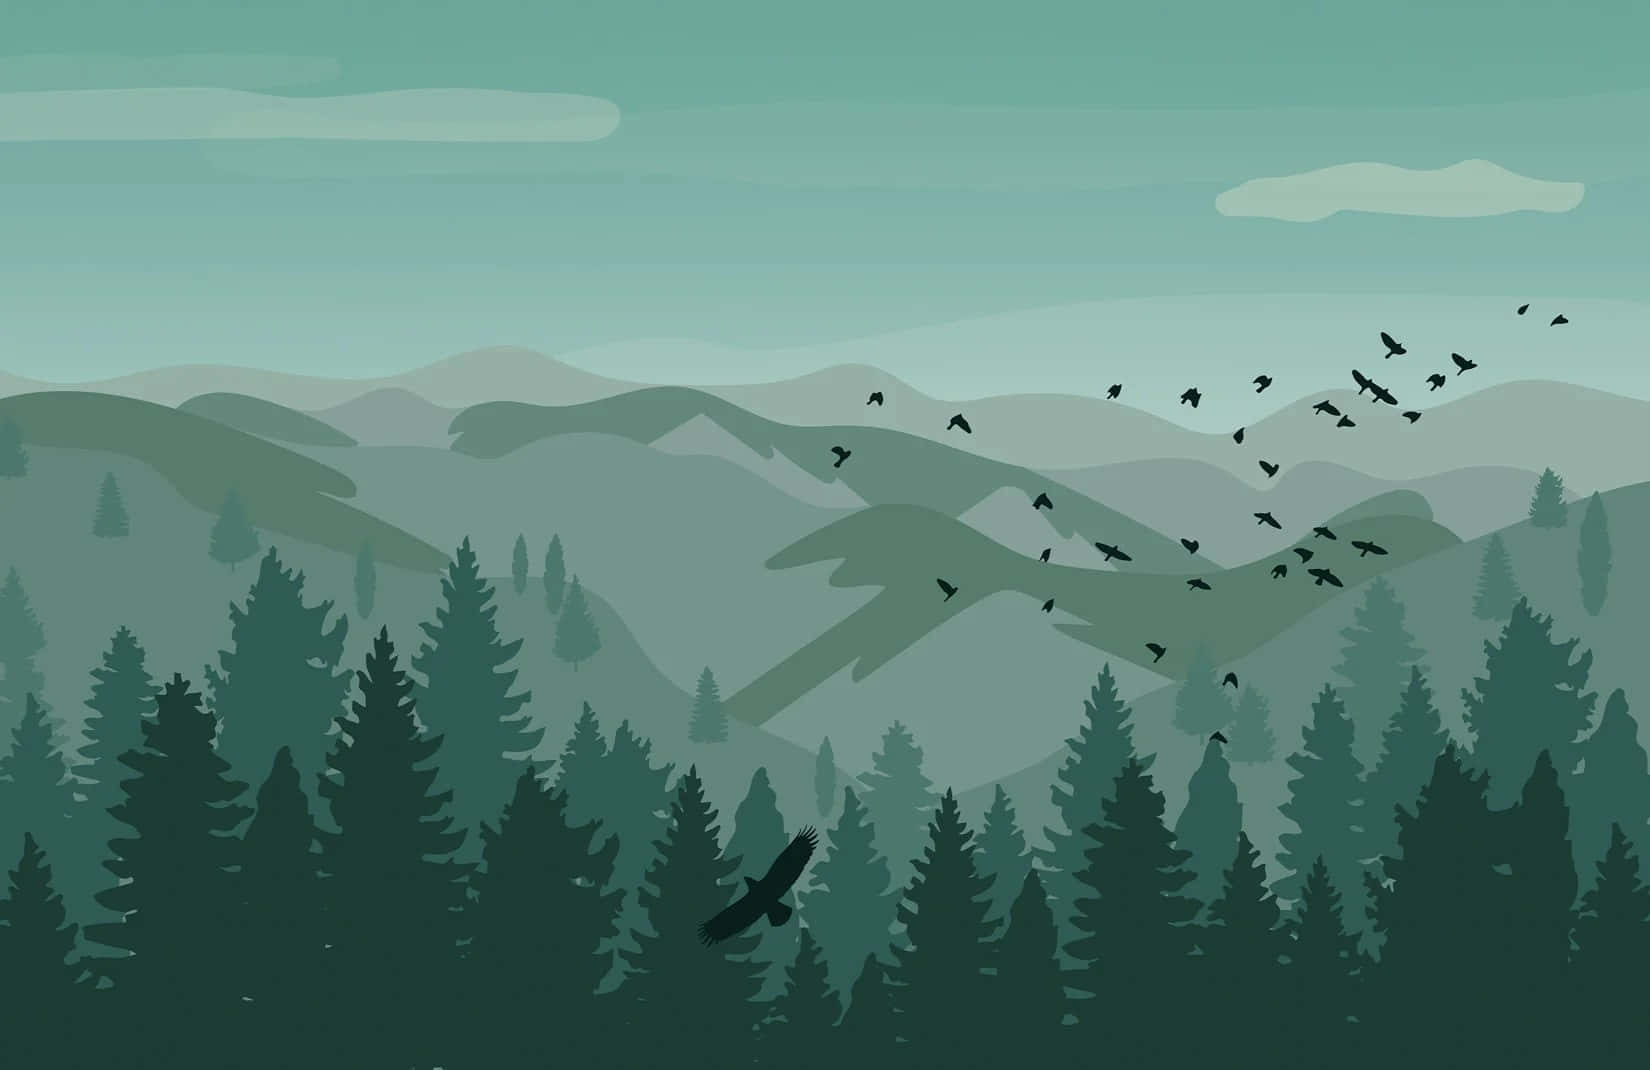 Misty_ Forest_ Mountain_ Landscape_with_ Birds_ Flying Wallpaper